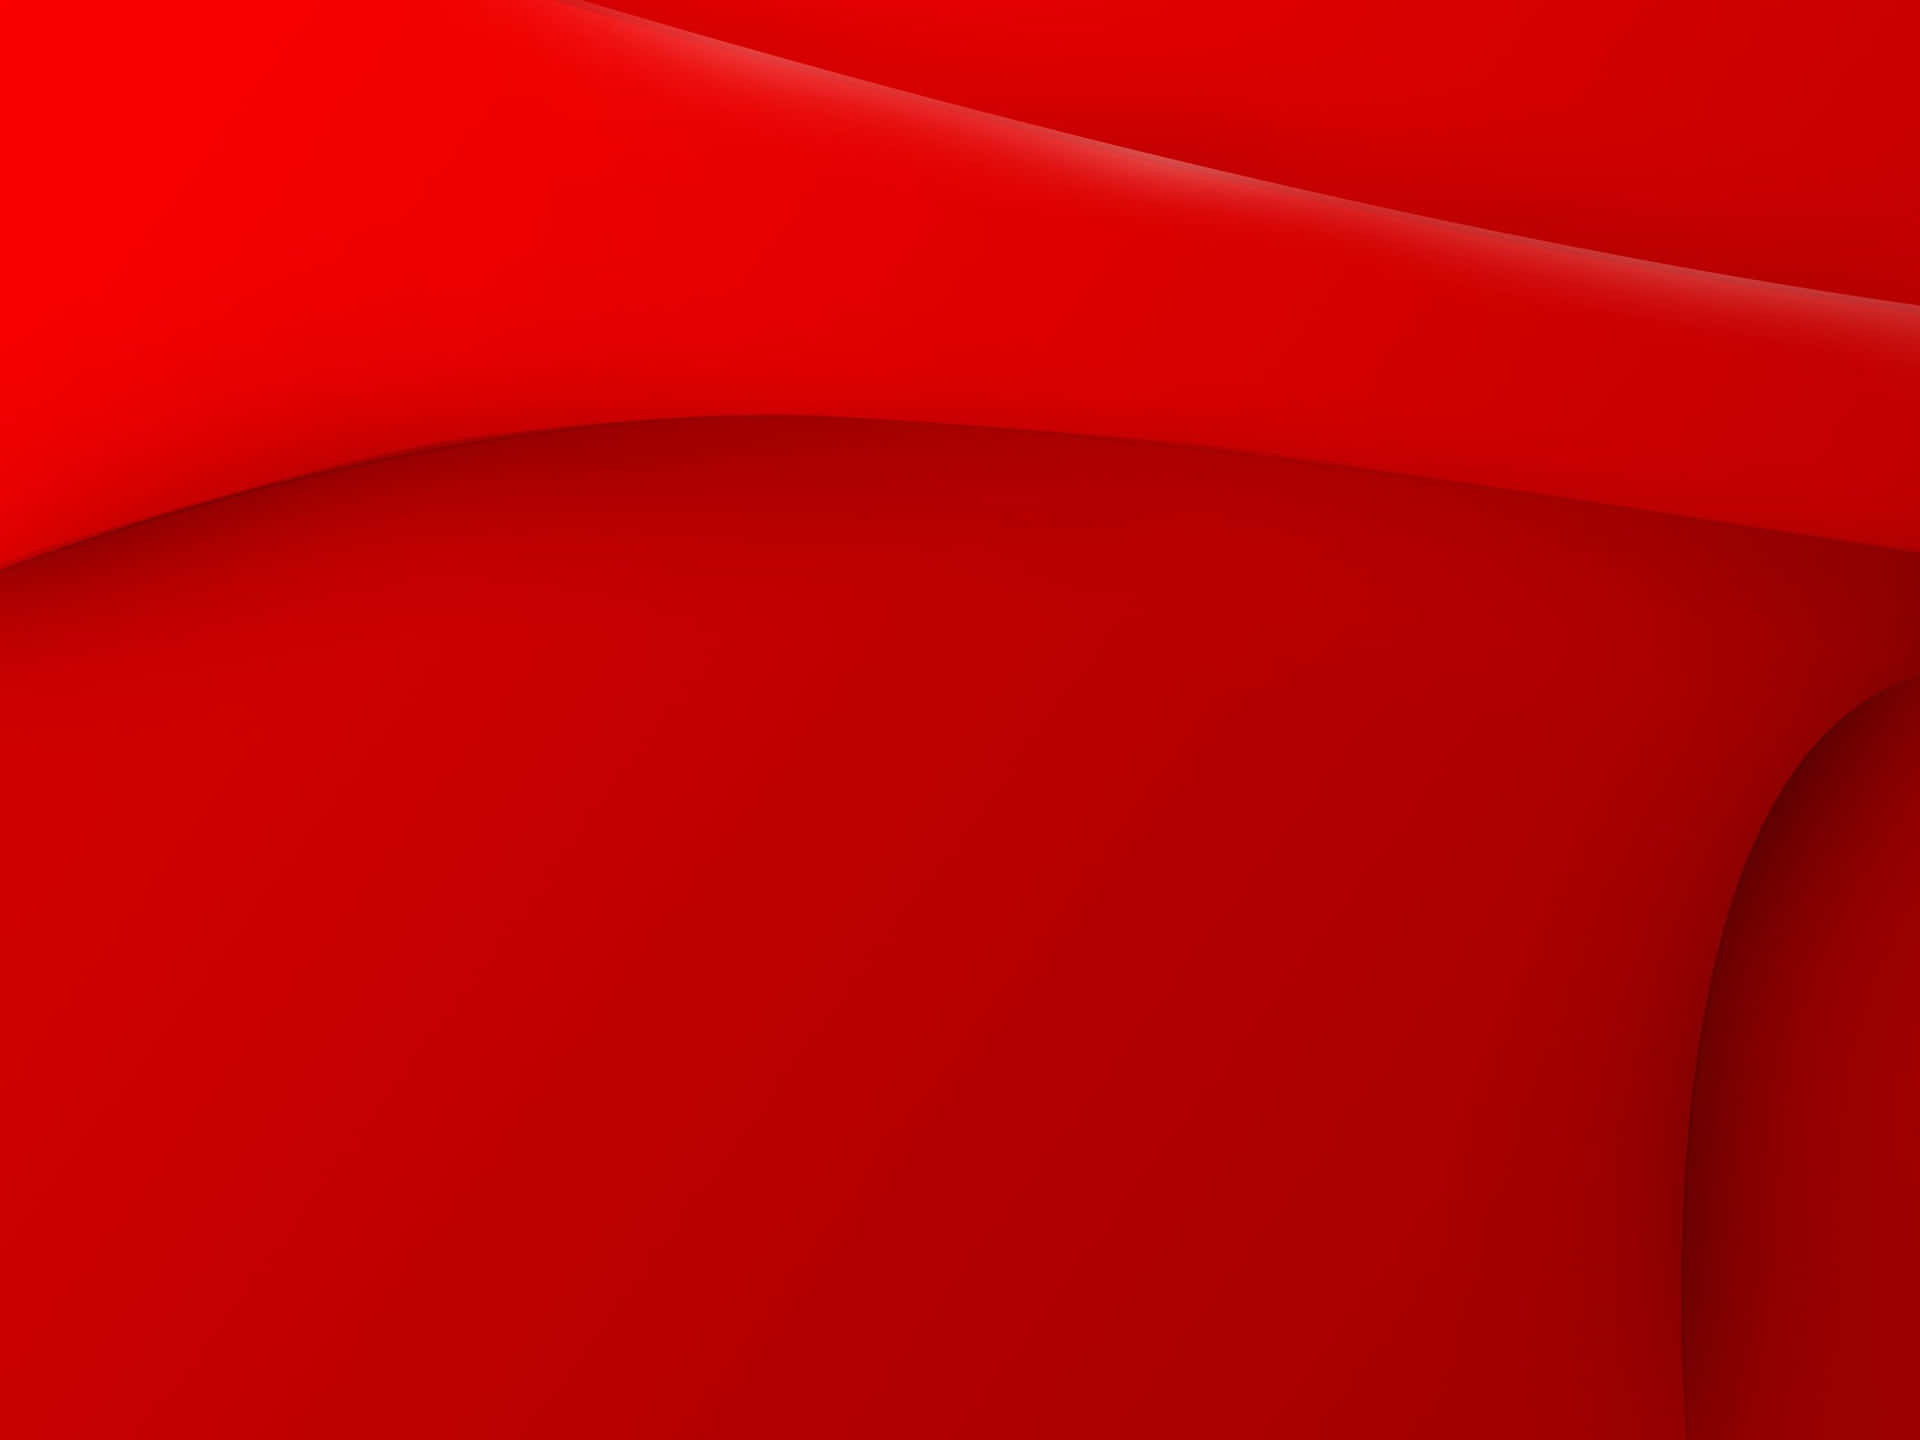 Red Abstract Background With A Wavy Shape